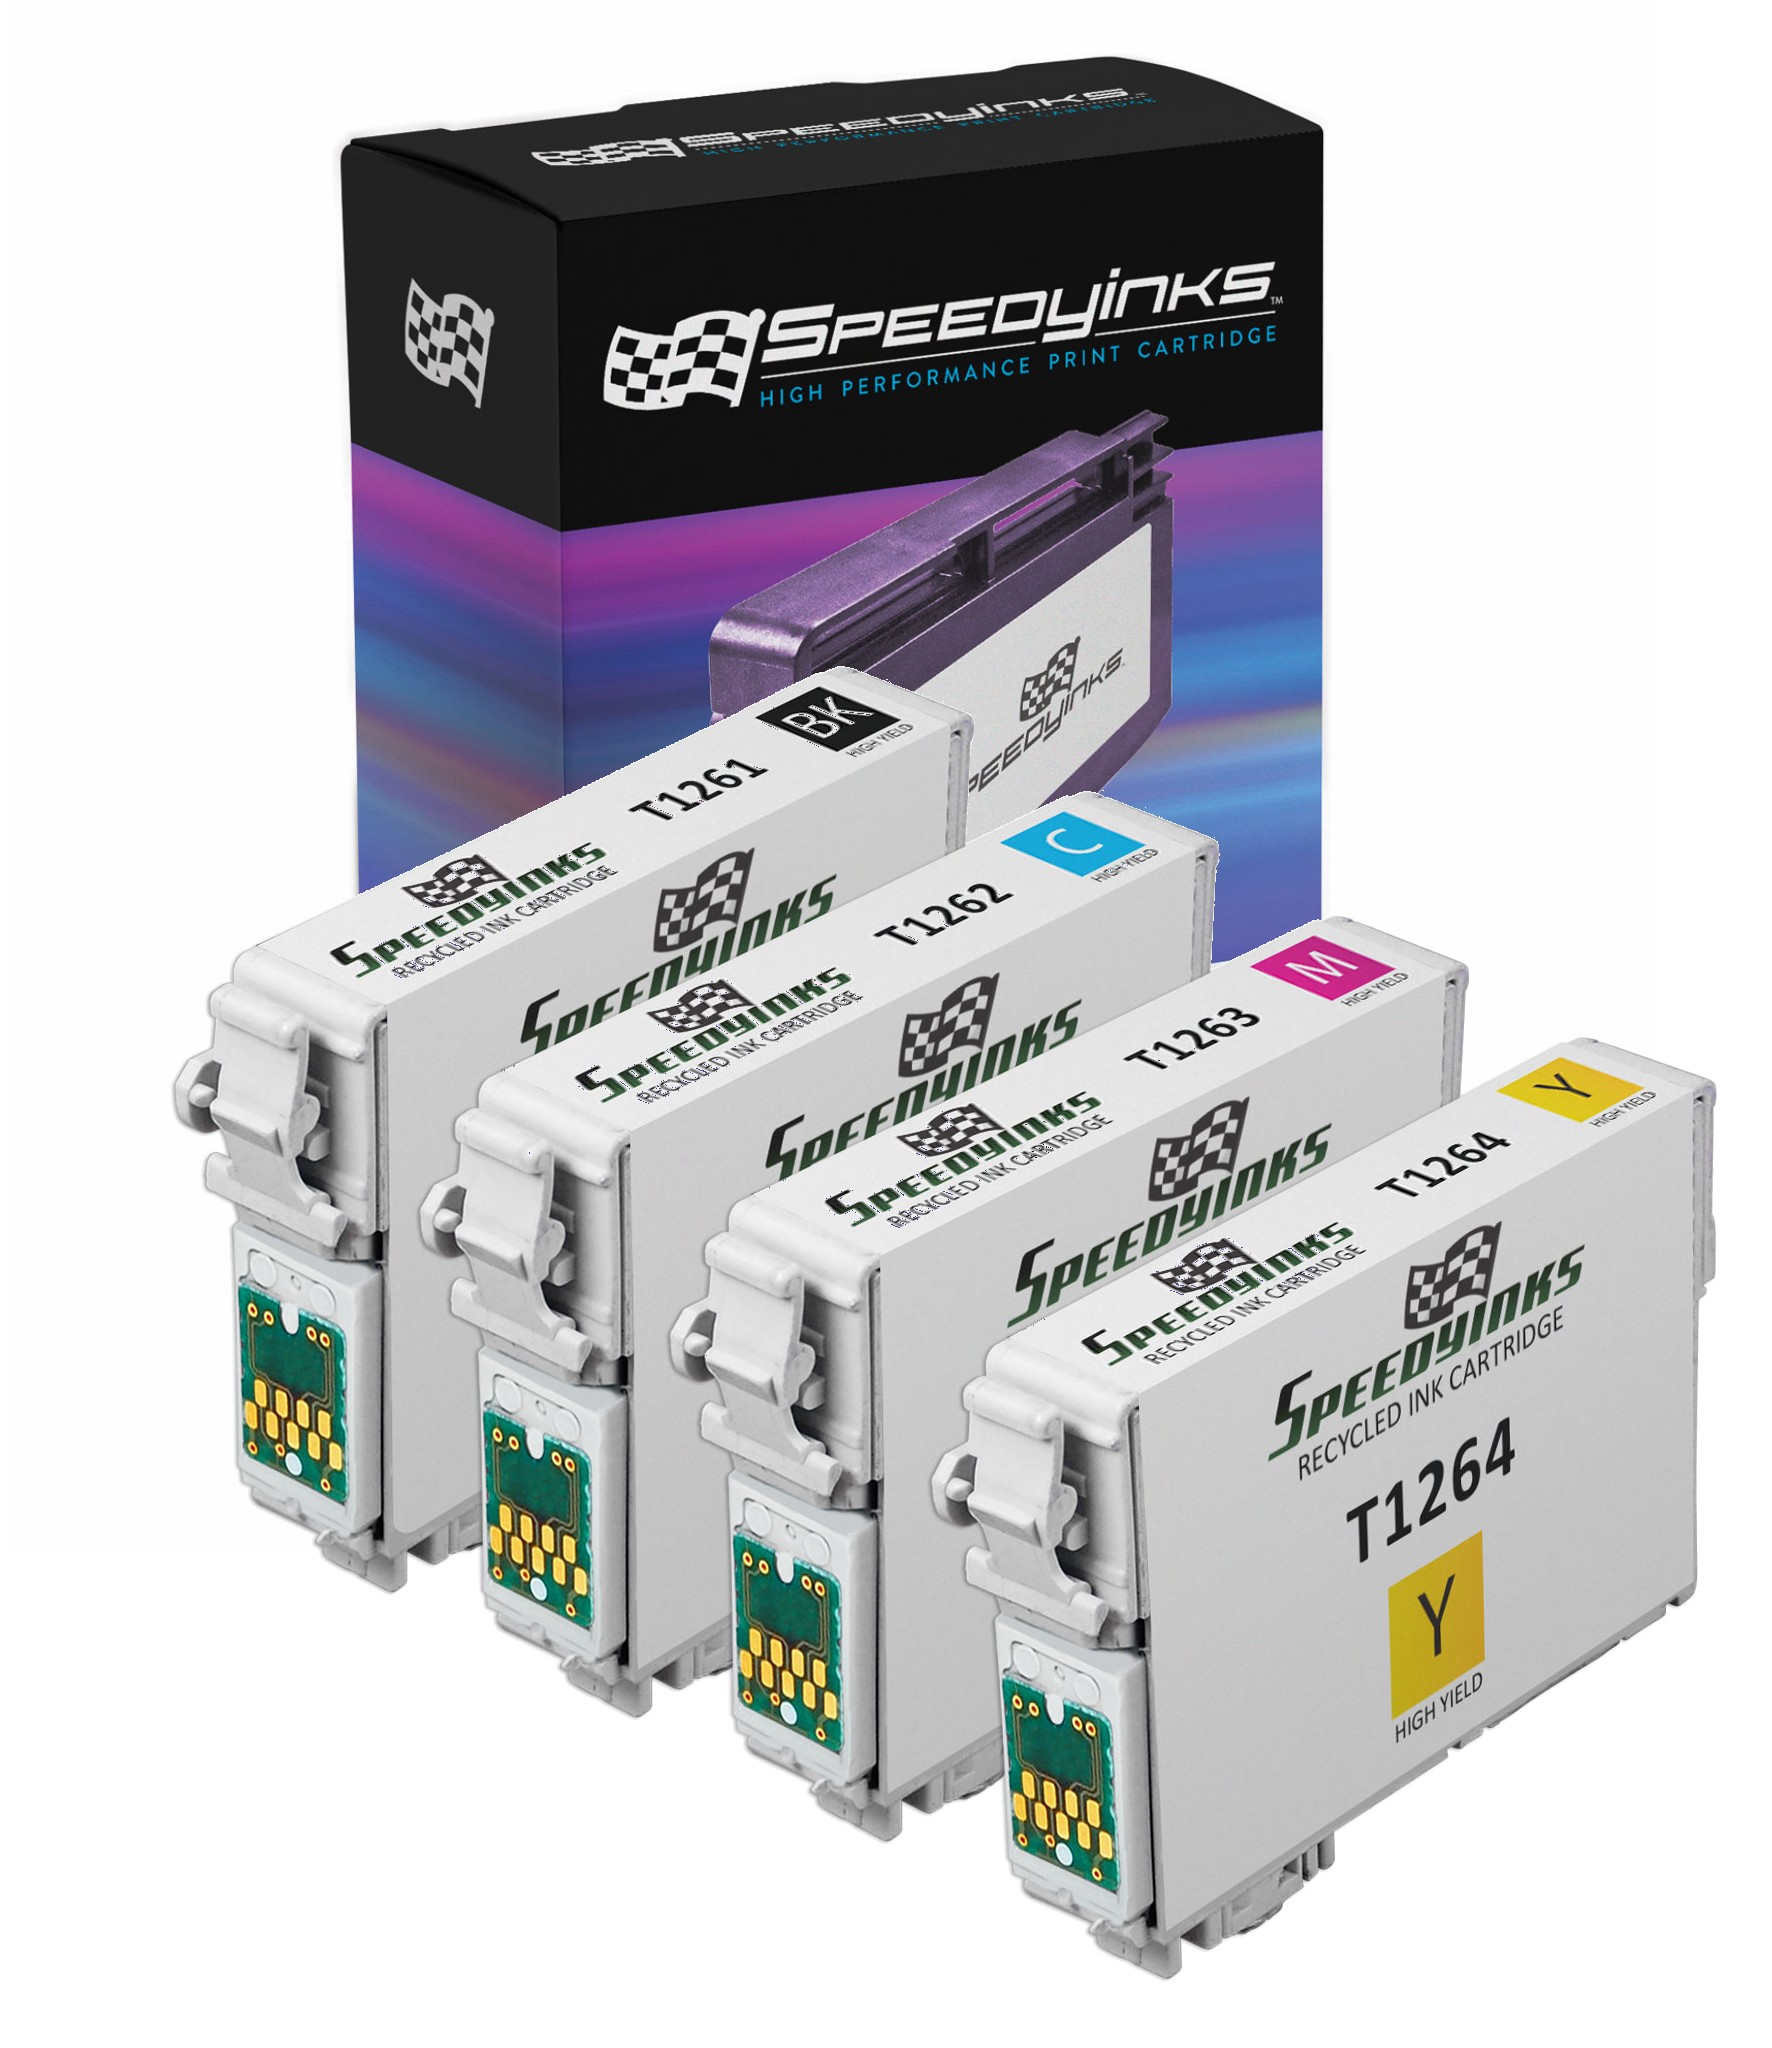 Speedy Inks - Generic Remanufactured Ink Cartridge for Epson 126 Cartridges, Set of 4: 1 each of T126120 Black, T126220 Cyan, T126320 Magenta, T126420 Yellow - image 1 of 7